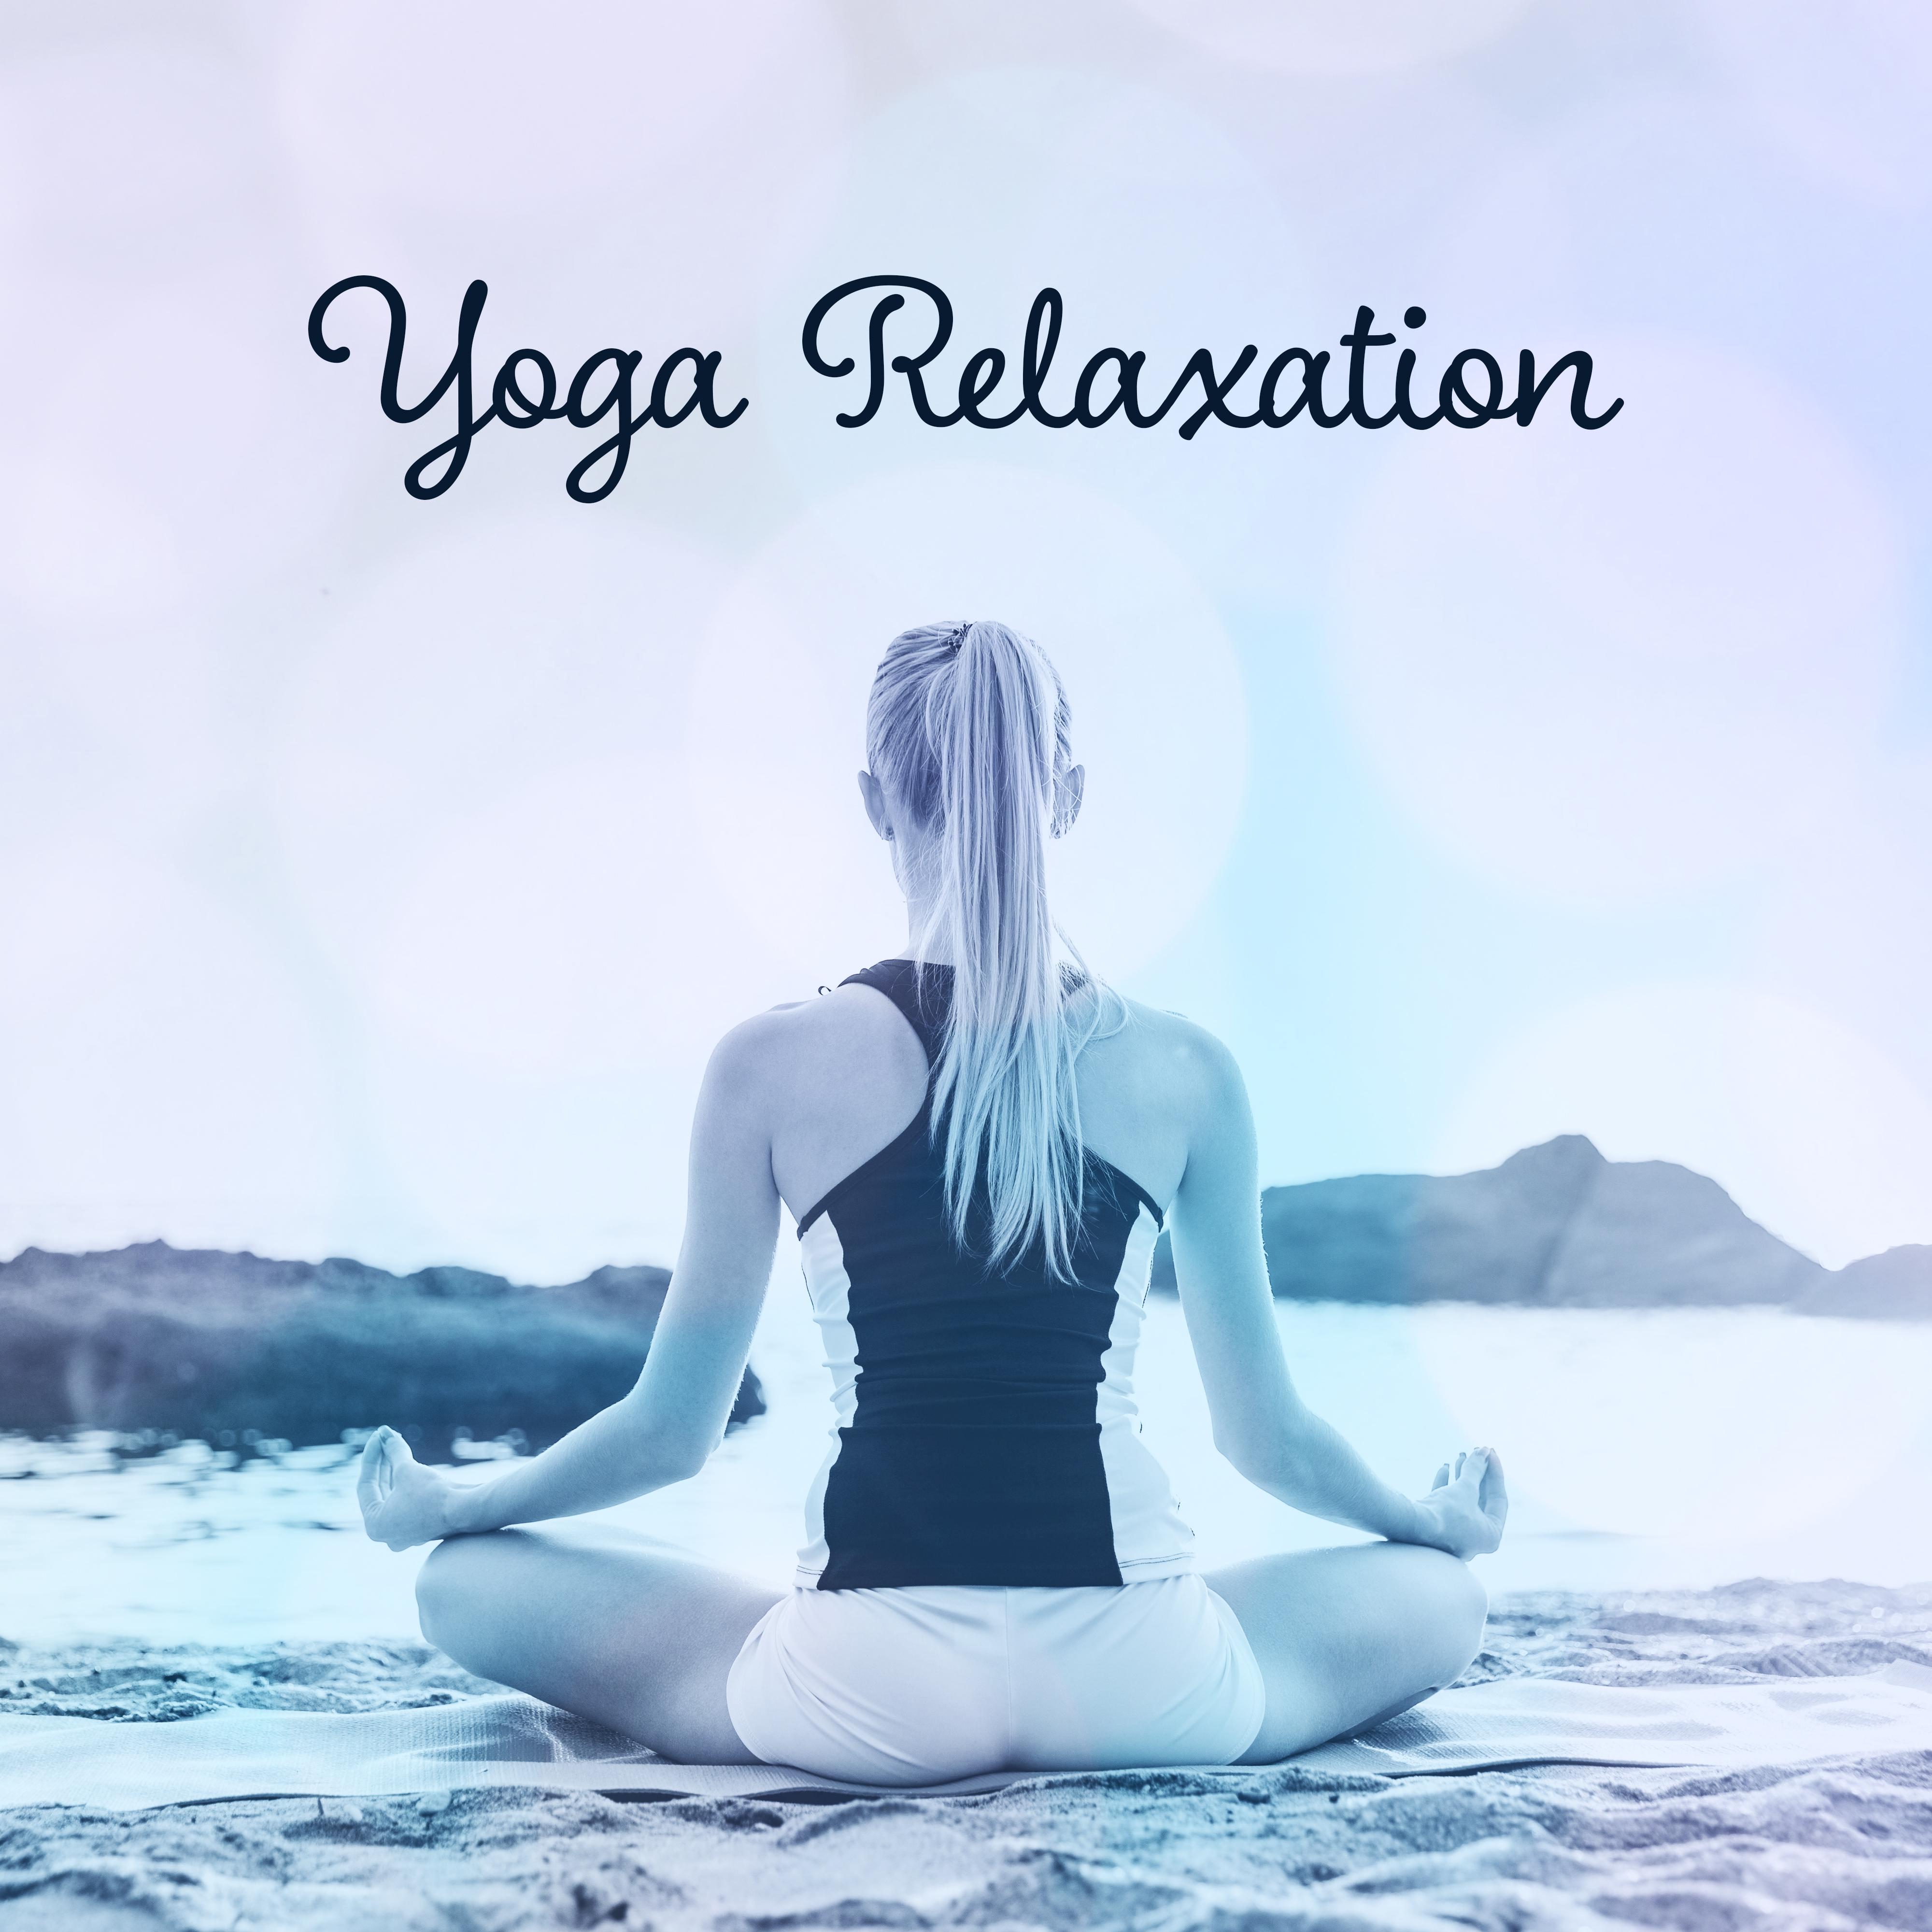 Yoga Relaxation – New Age Music, Nature Sounds, Yoga Background, Meditate, Rest